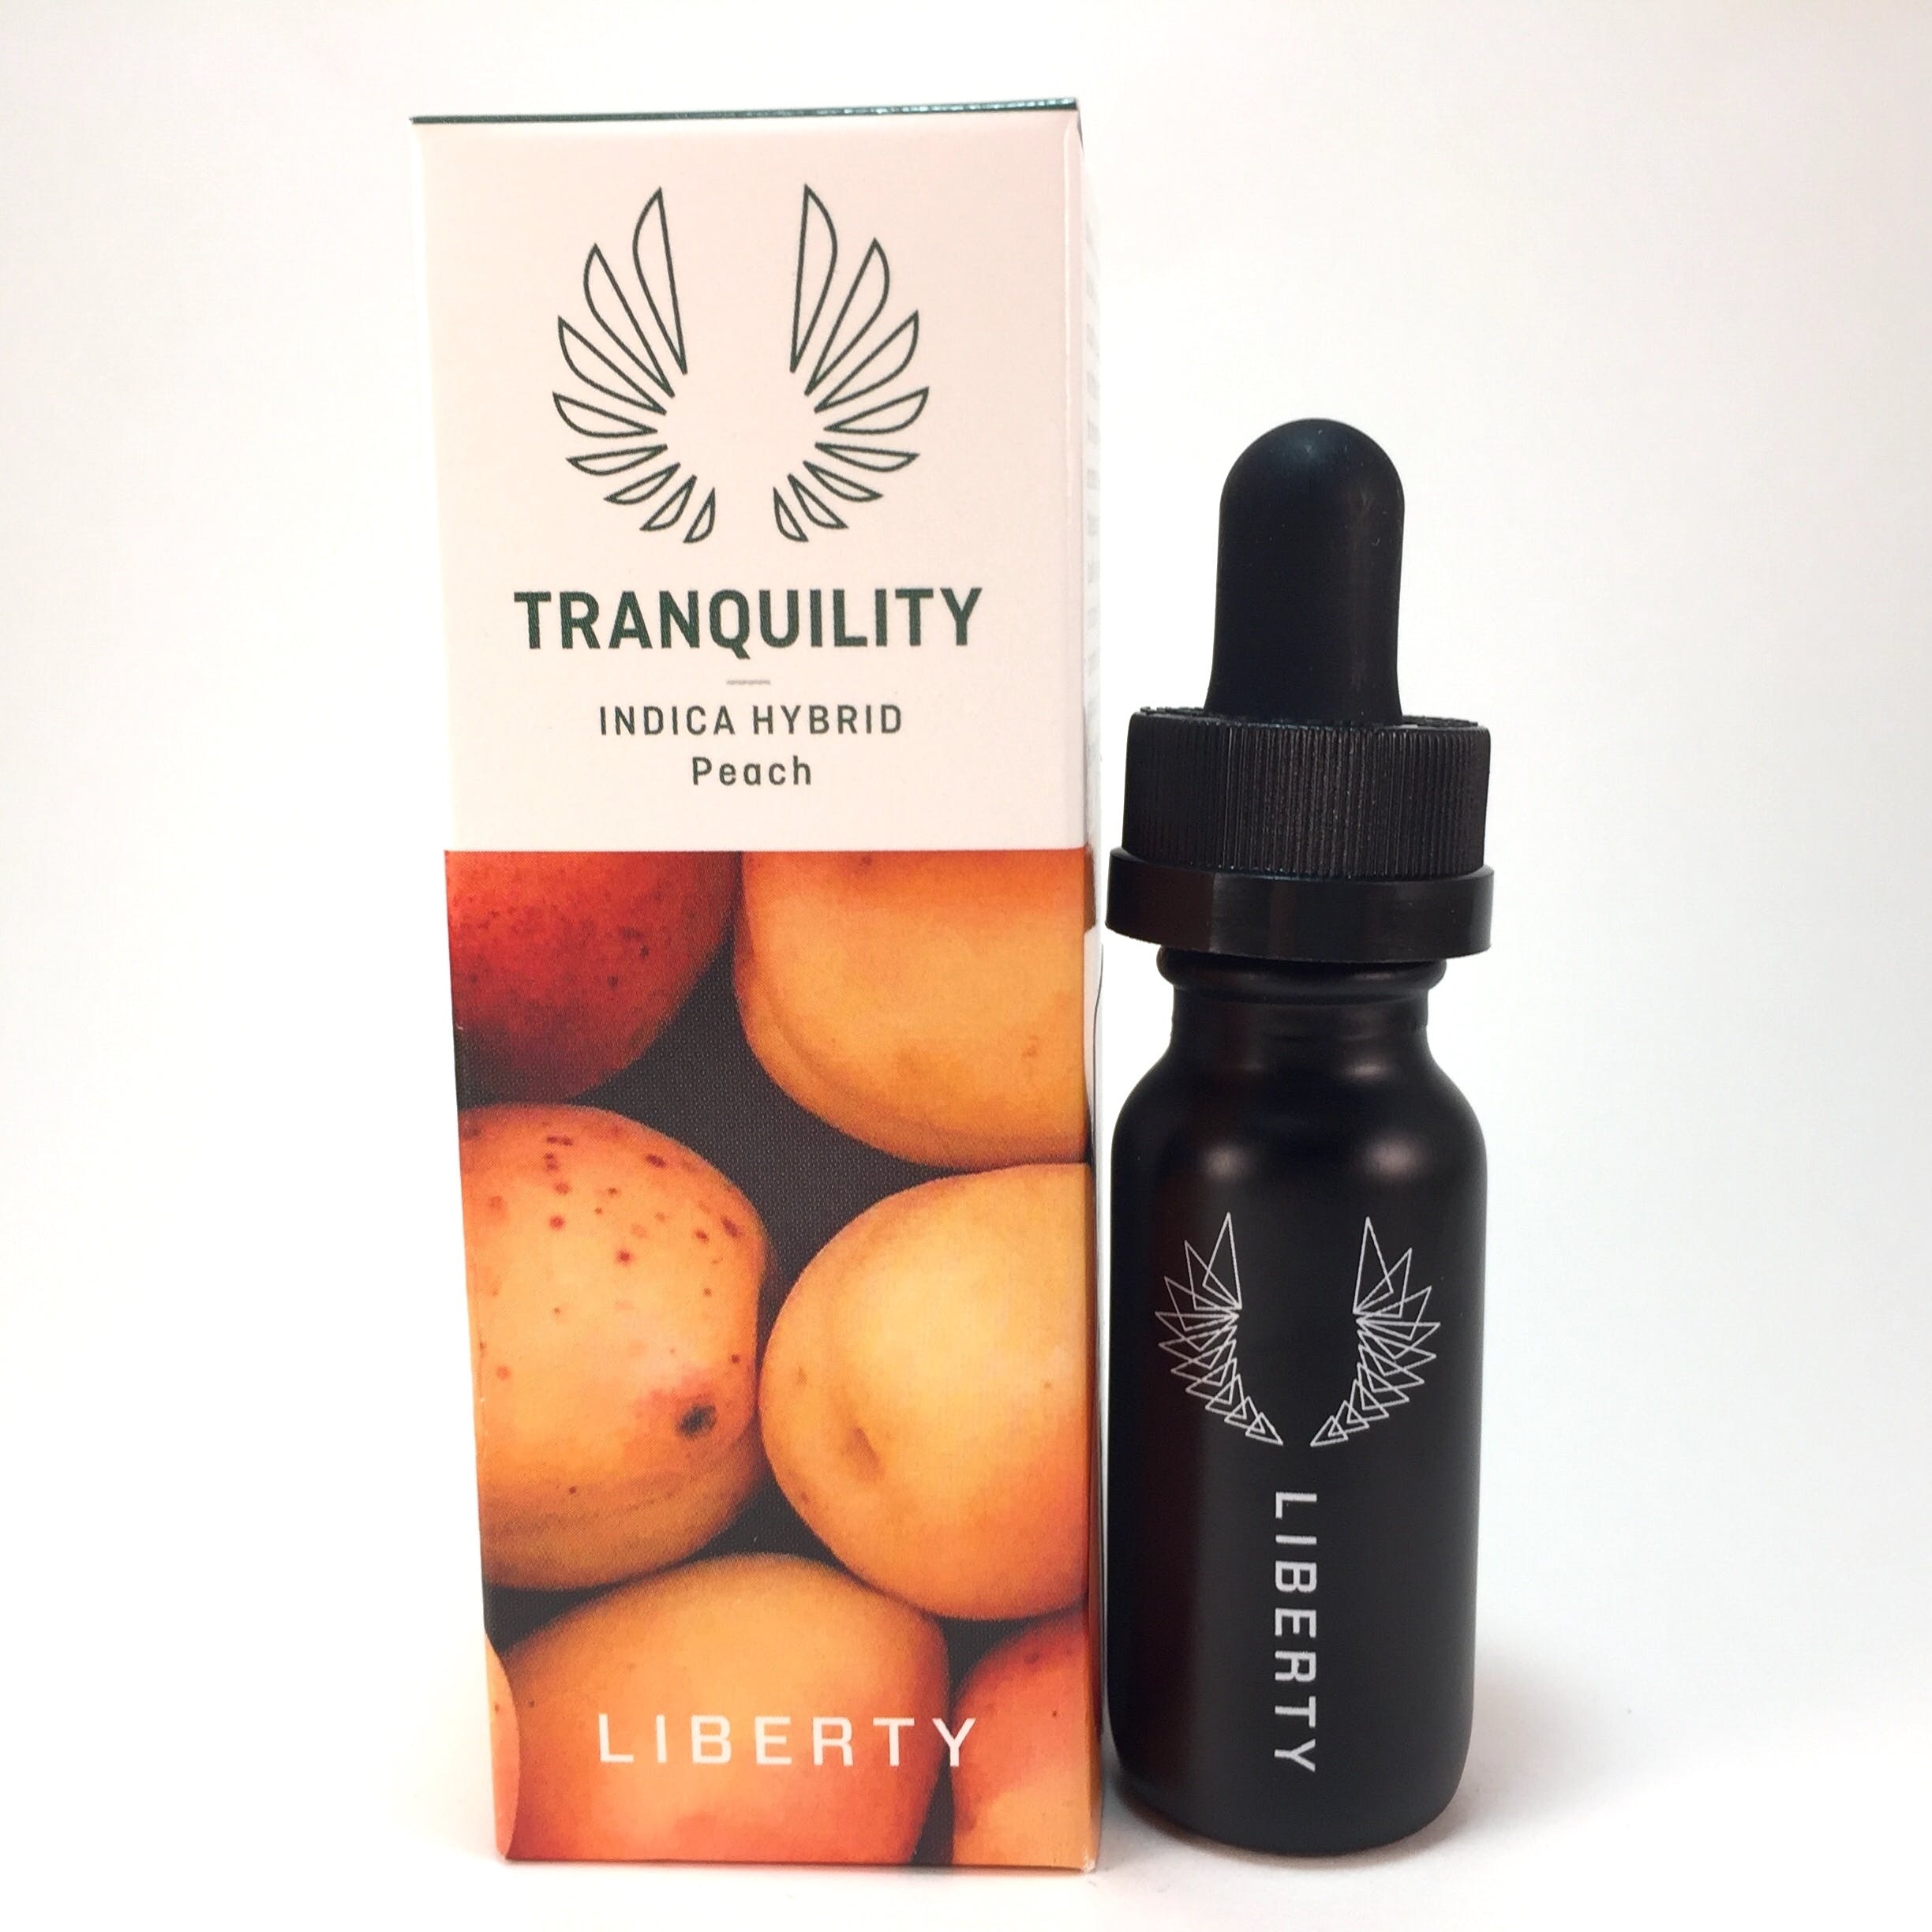 Liberty TRANQUILITY Cotton Kandy + Blueberry Skunk Tincture 100mg